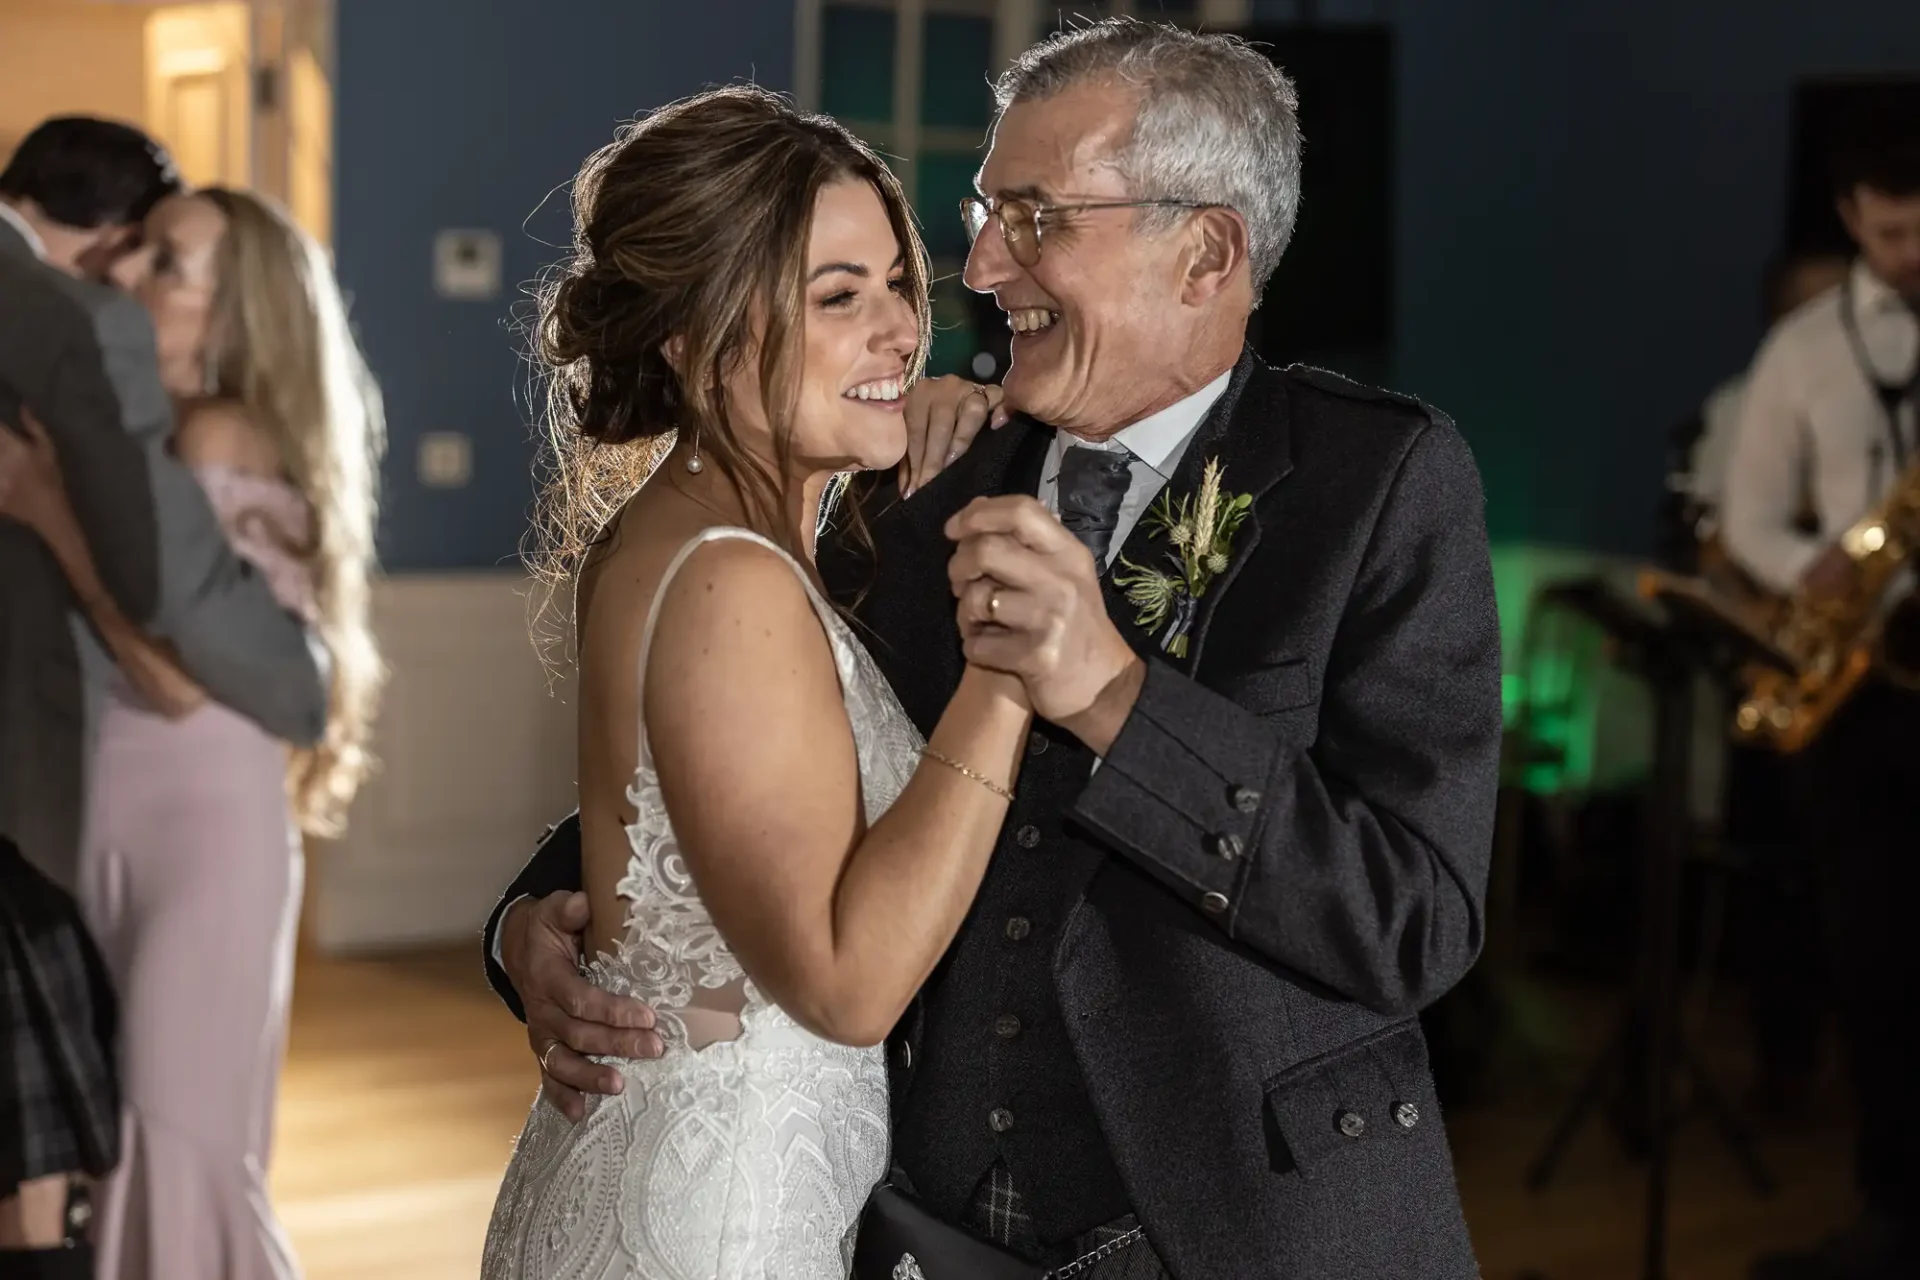 A bride and her father share a joyful dance at her wedding reception, both smiling widely in a warmly-lit hall with guests and a live band in the background.